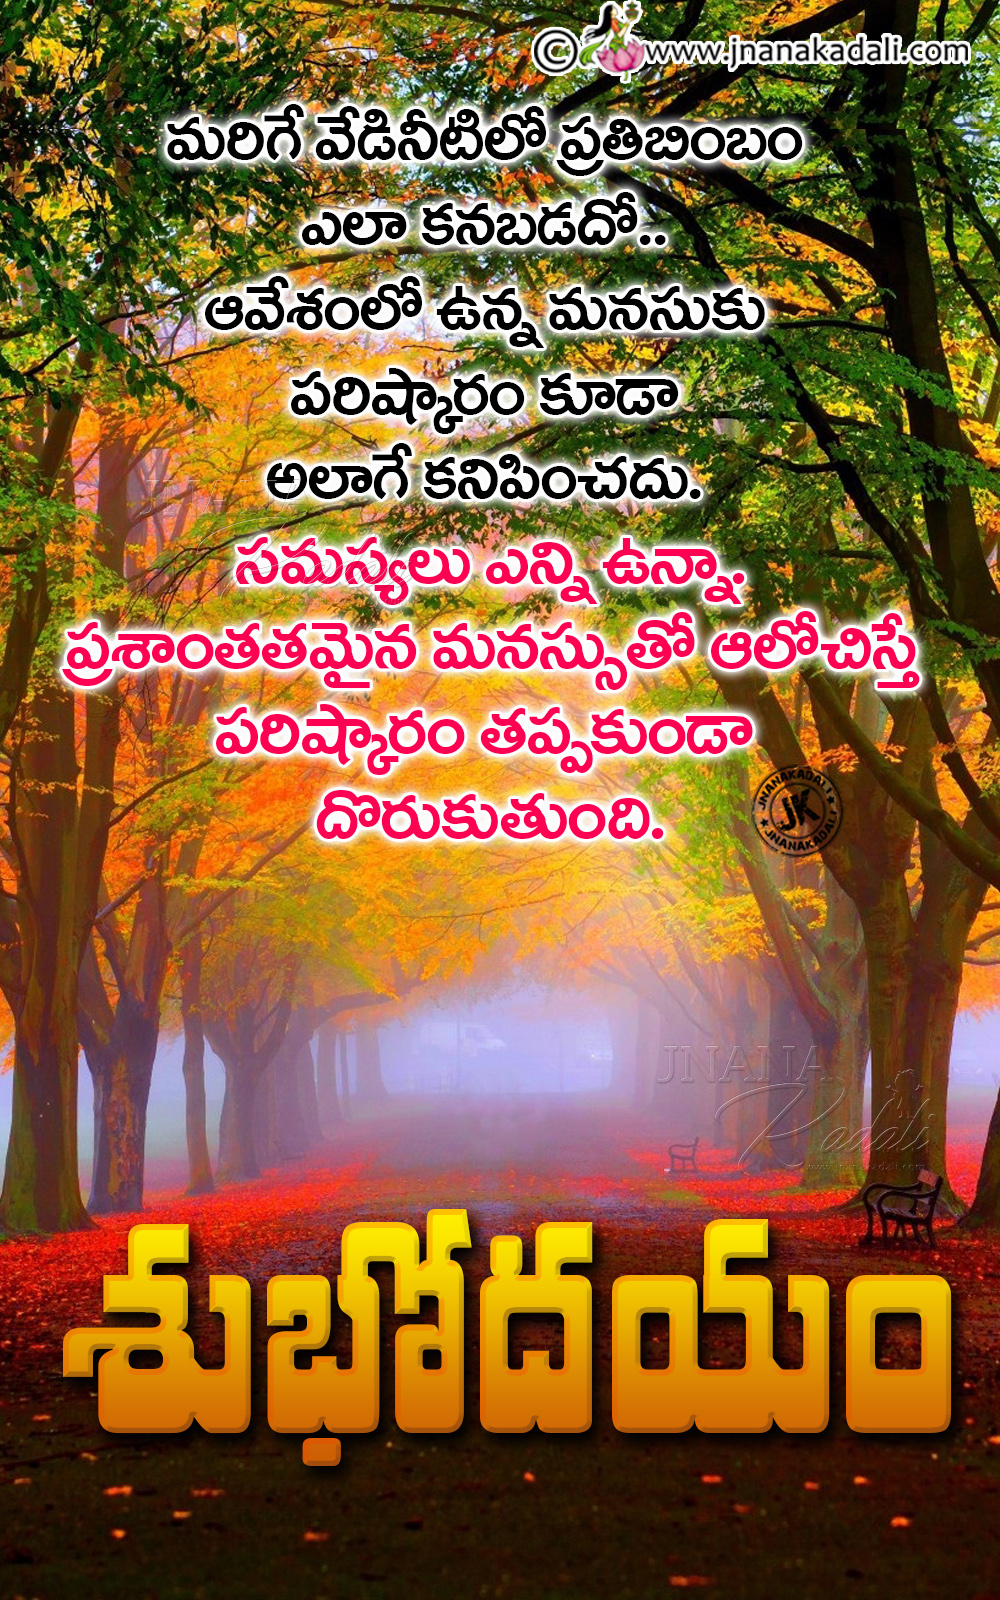 Motivational Best Good morning Messages Quotes in Telugu Language ...